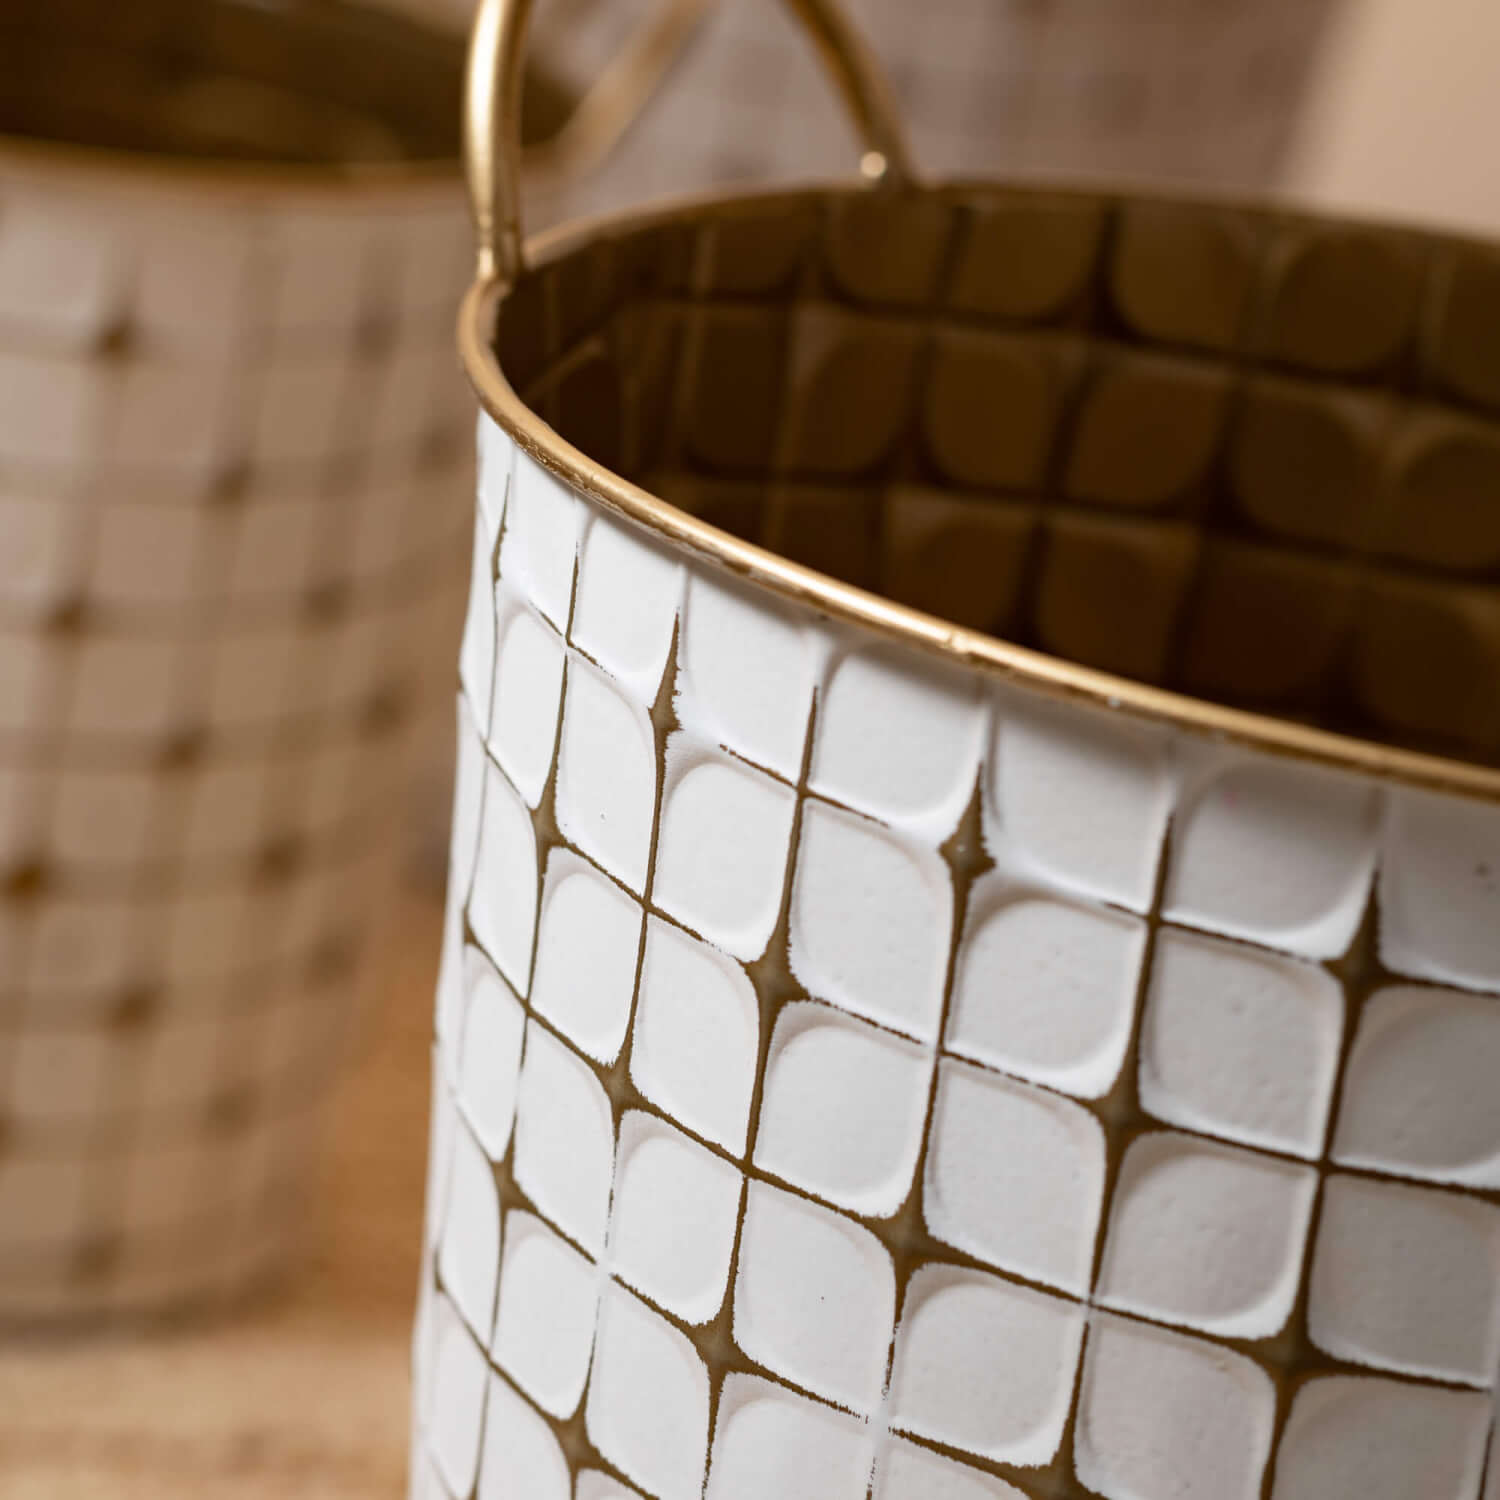 Gold and White Planter Bucket Set Elevate Home Decor - Pots & Planters